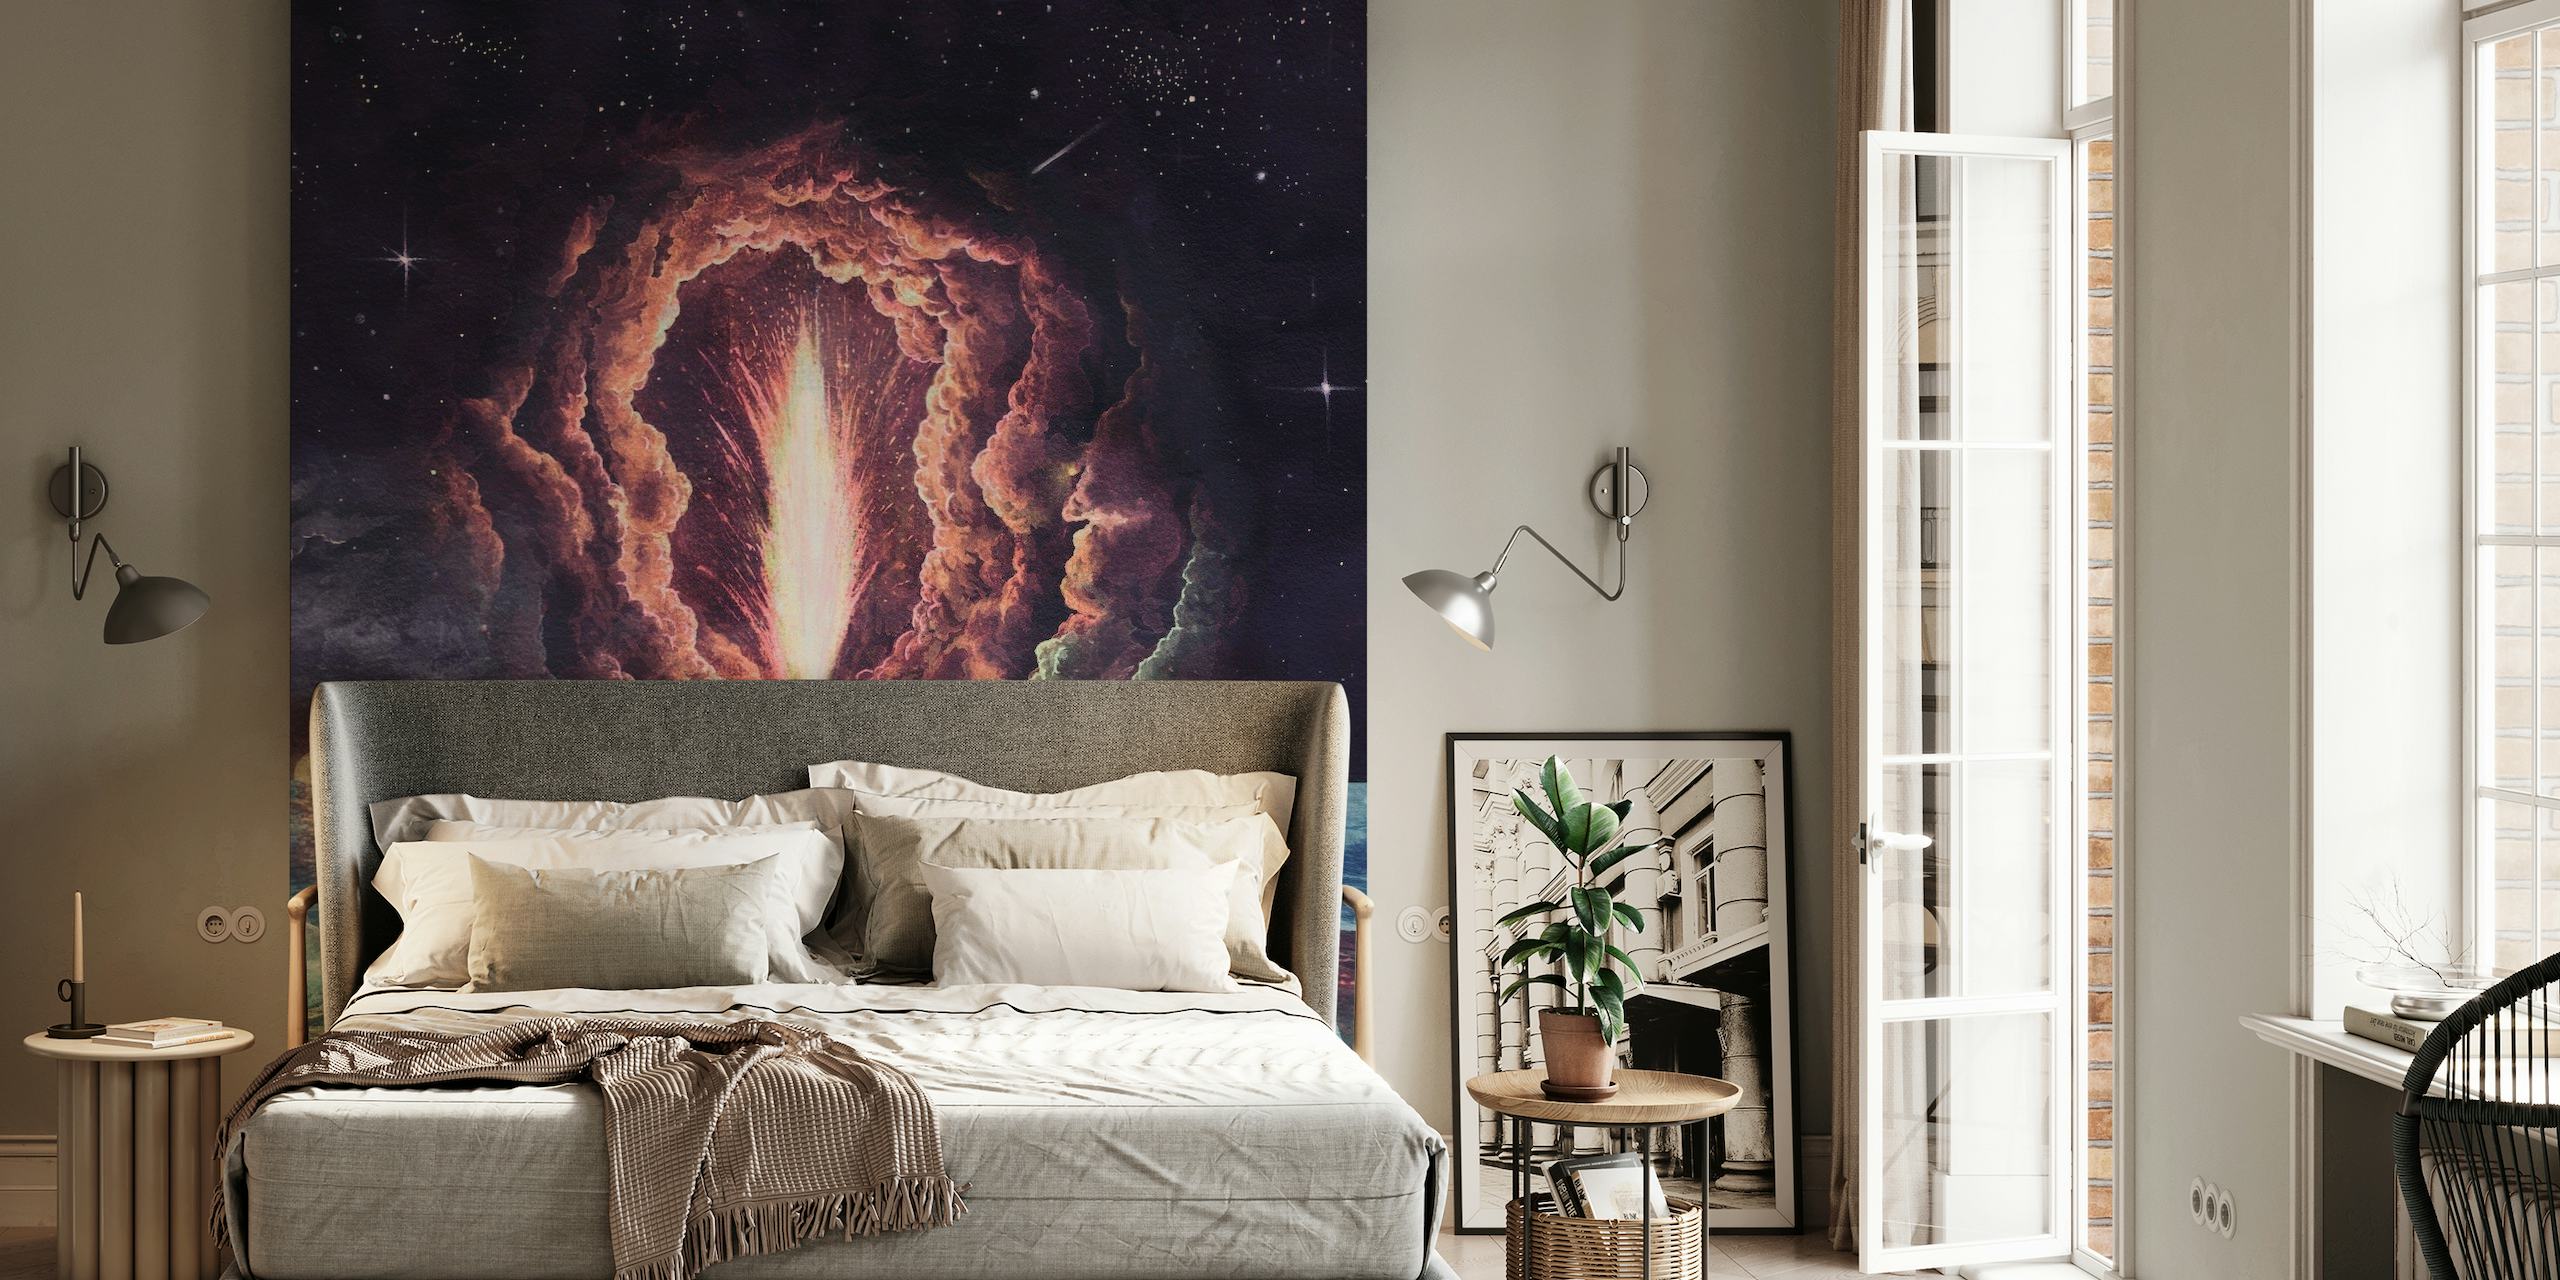 Volcano Eruption wall mural with vibrant colors and dynamic natural scenery